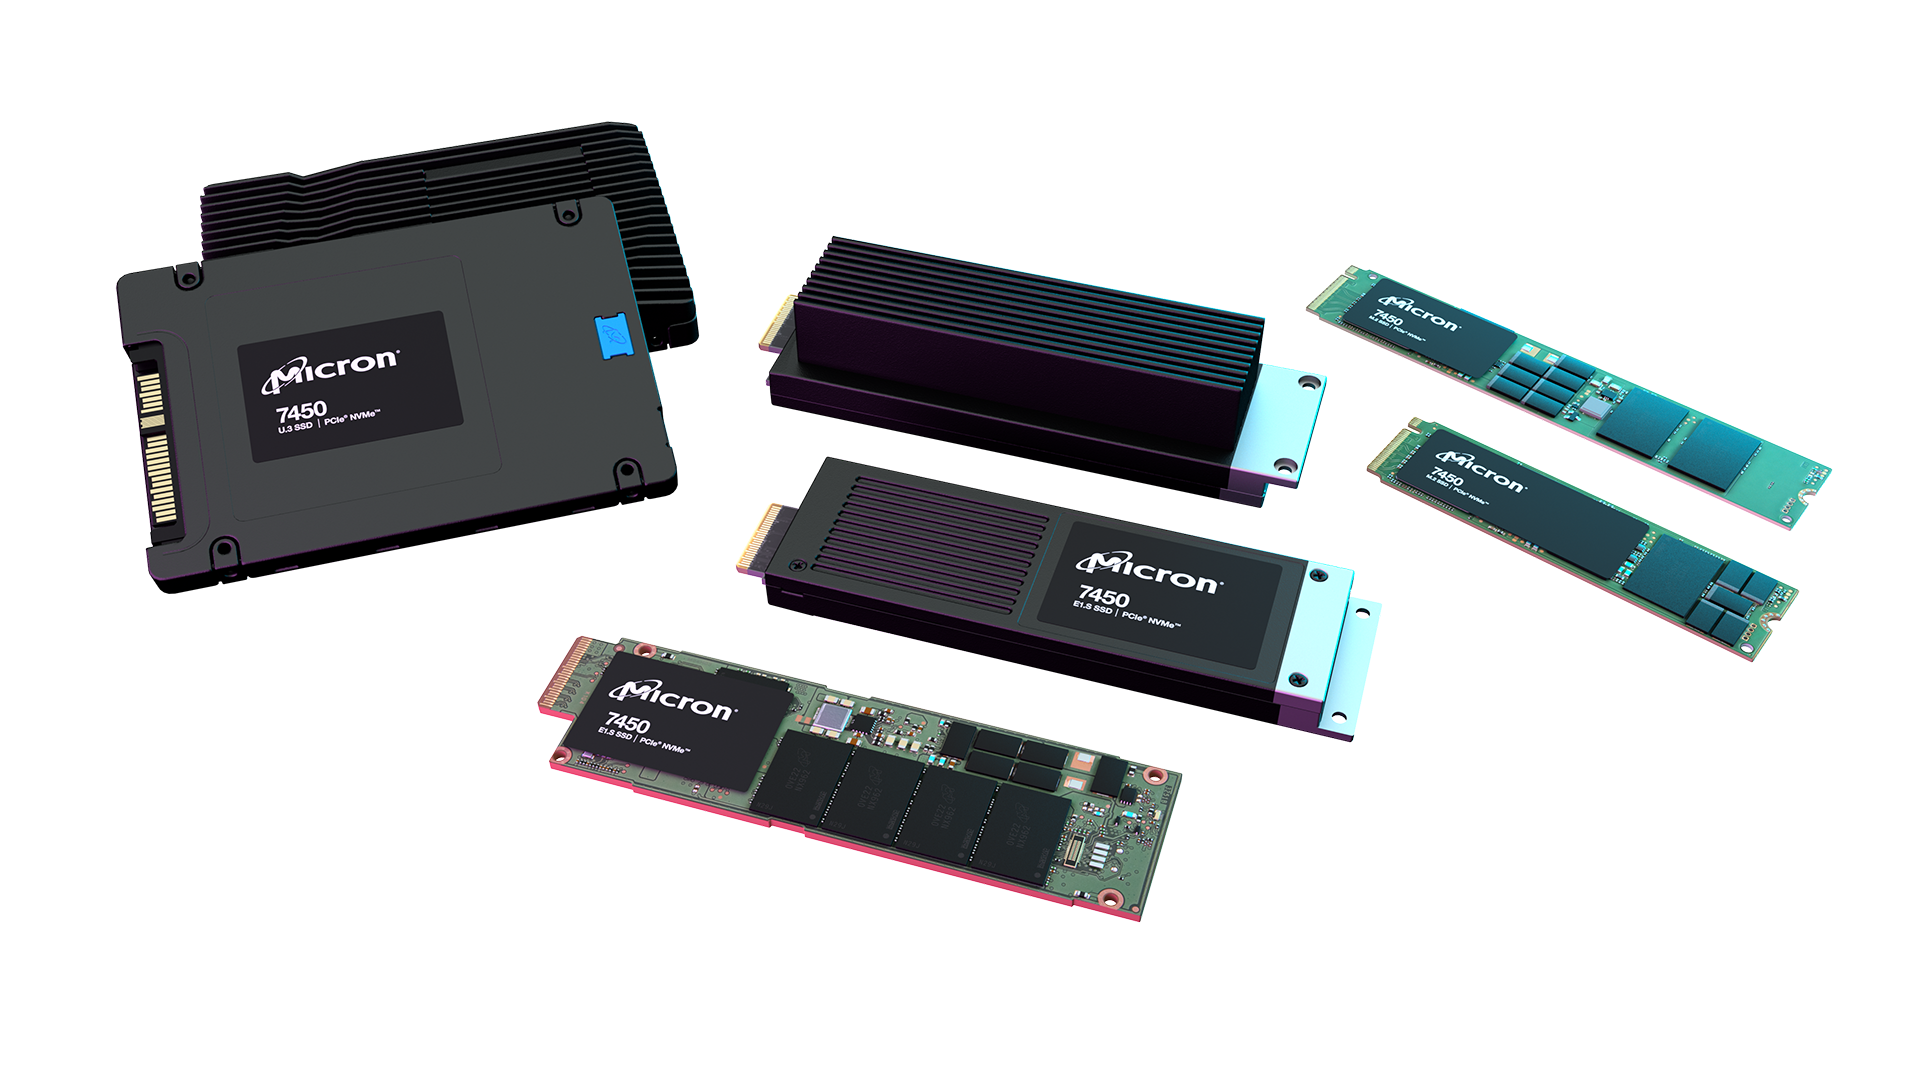 Micron 7450 SSD with NVME